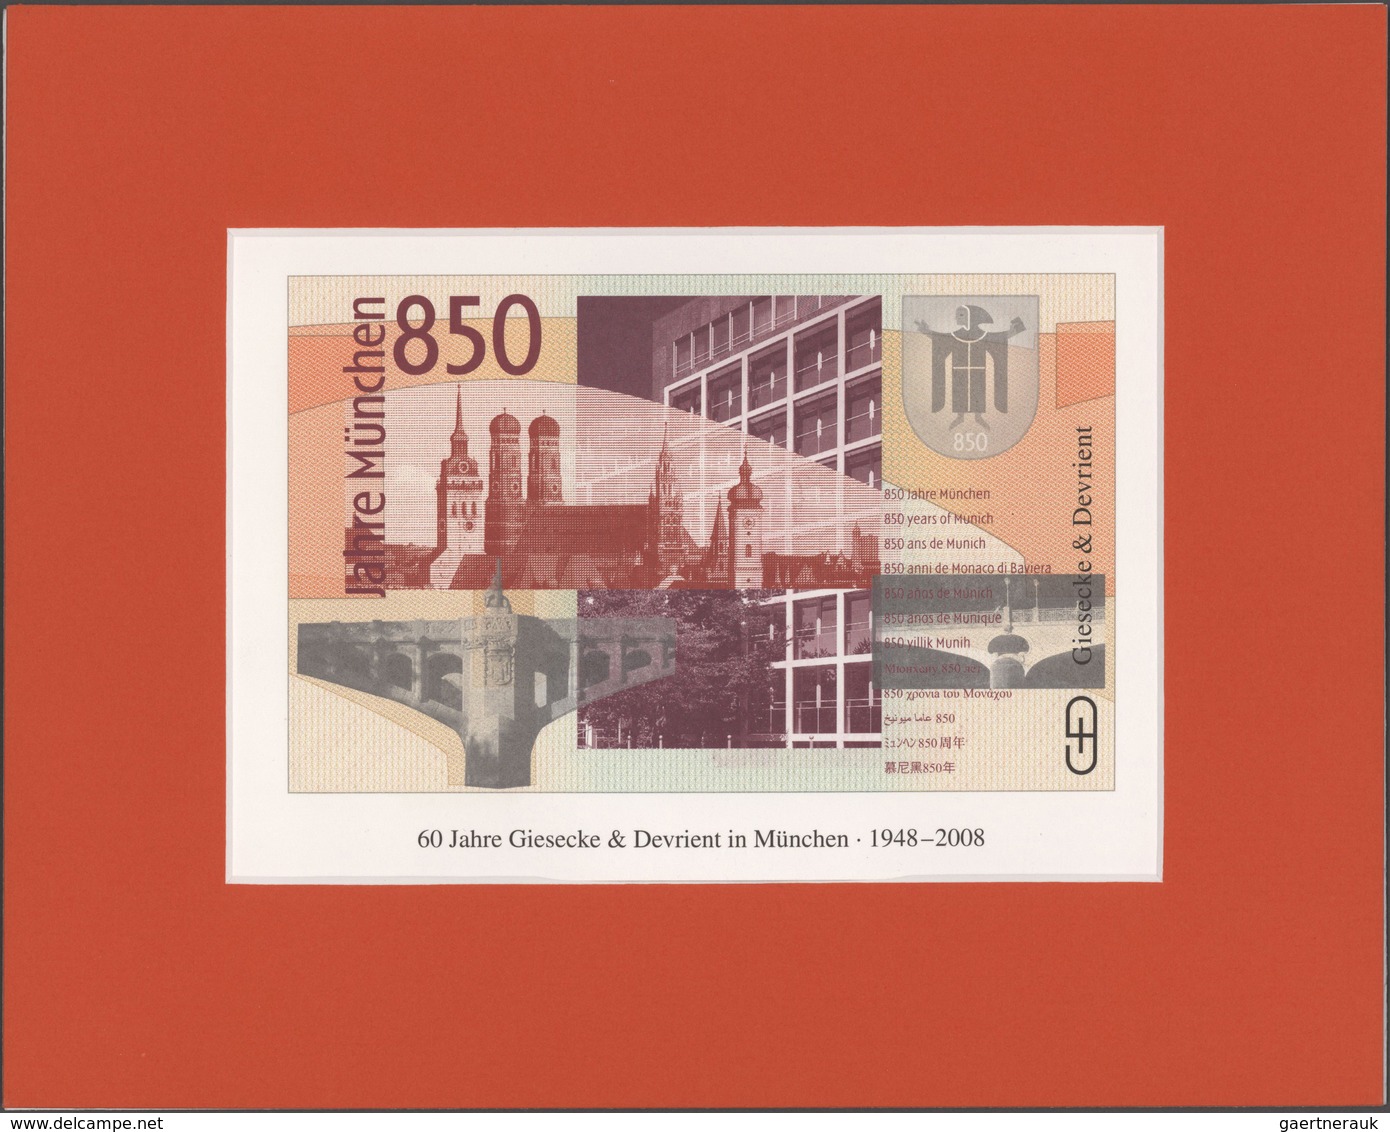 Testbanknoten: Very Rare Advertising Note By Giesecke & Devrient For The 850th Anniversary Of The Ci - Ficción & Especímenes